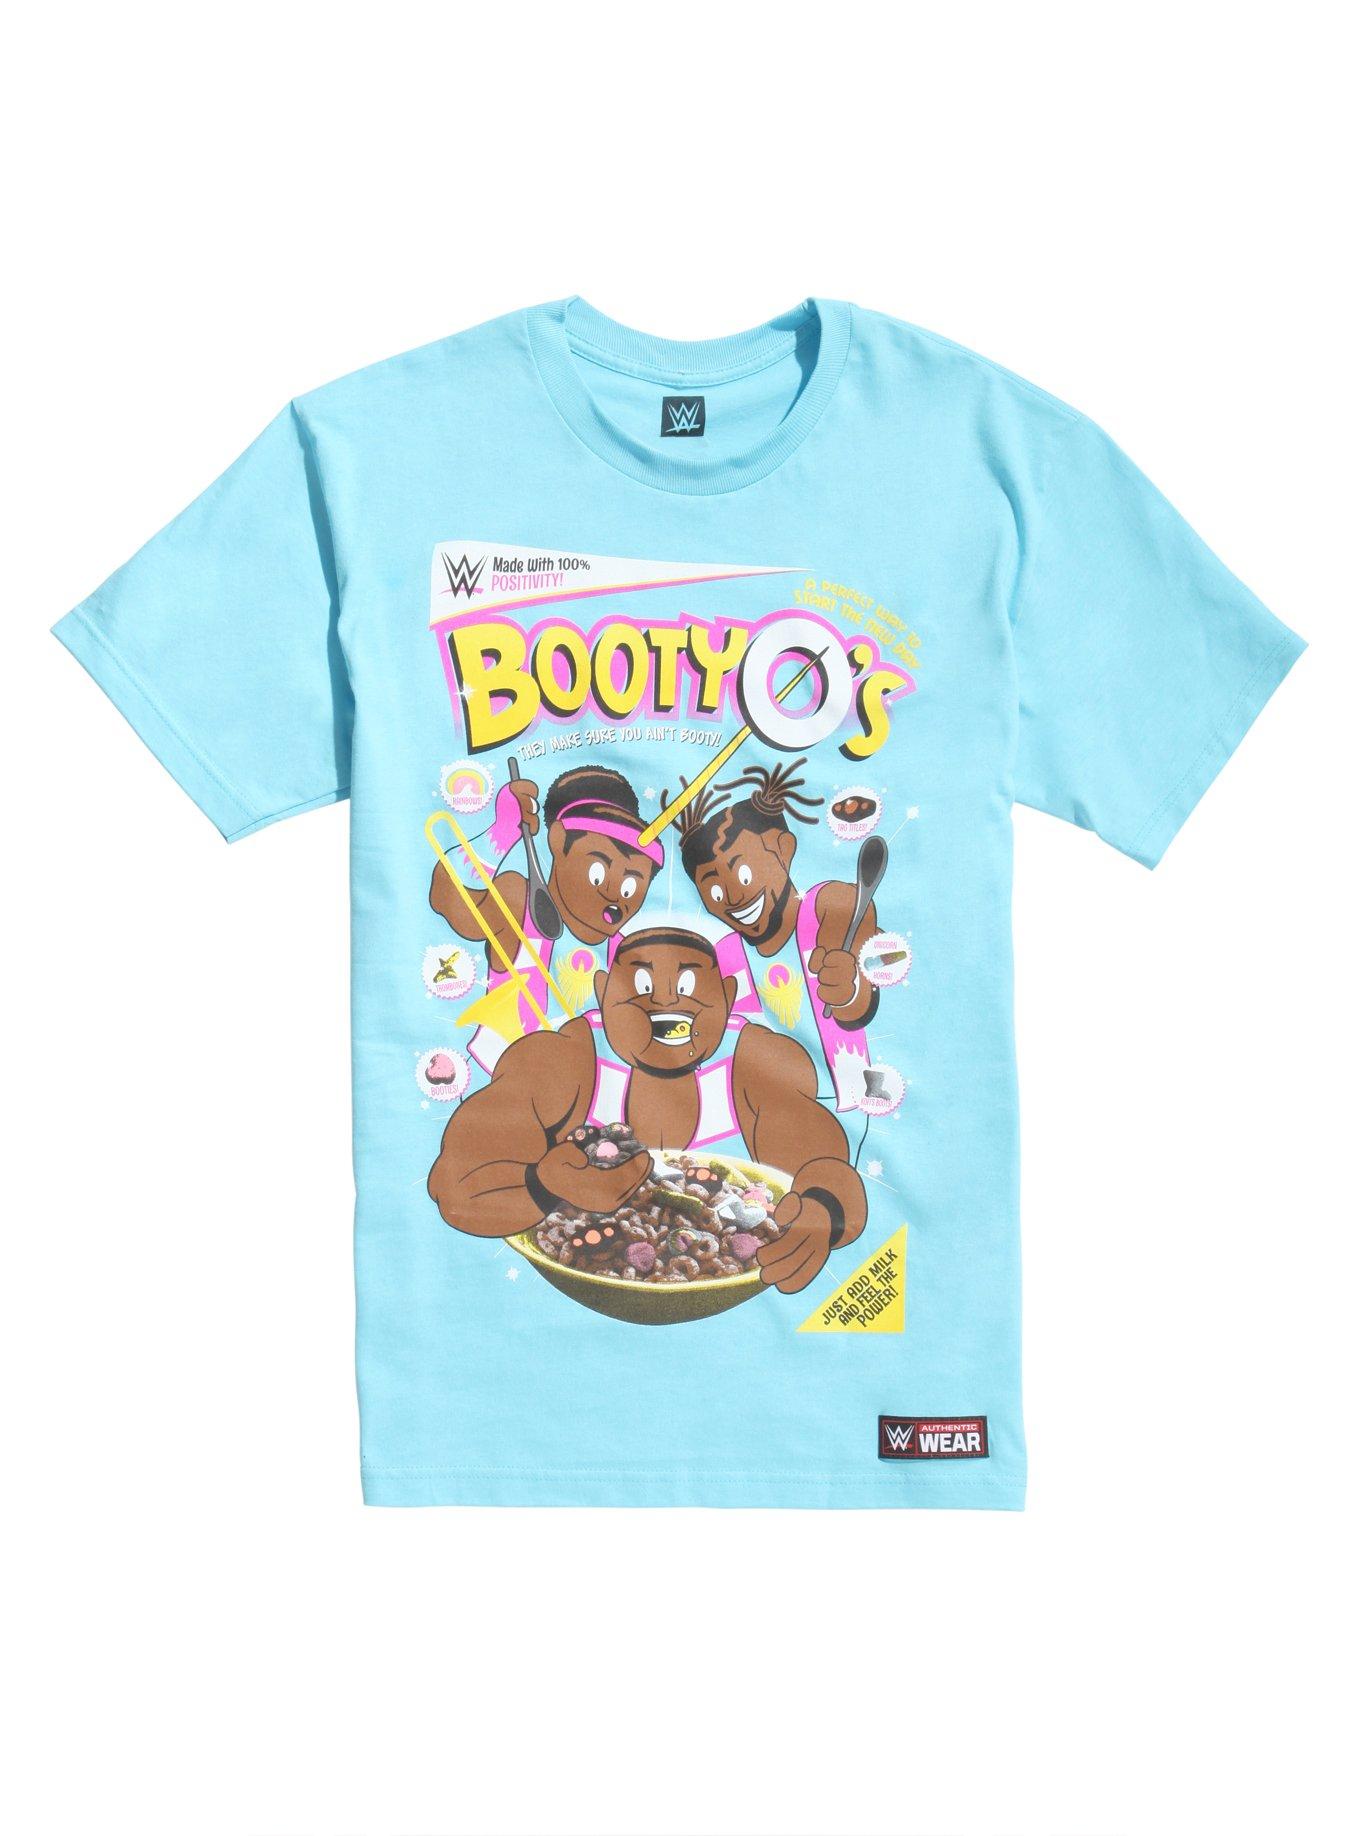 WWE The New Day Booty-O's T-Shirt, BLUE, hi-res